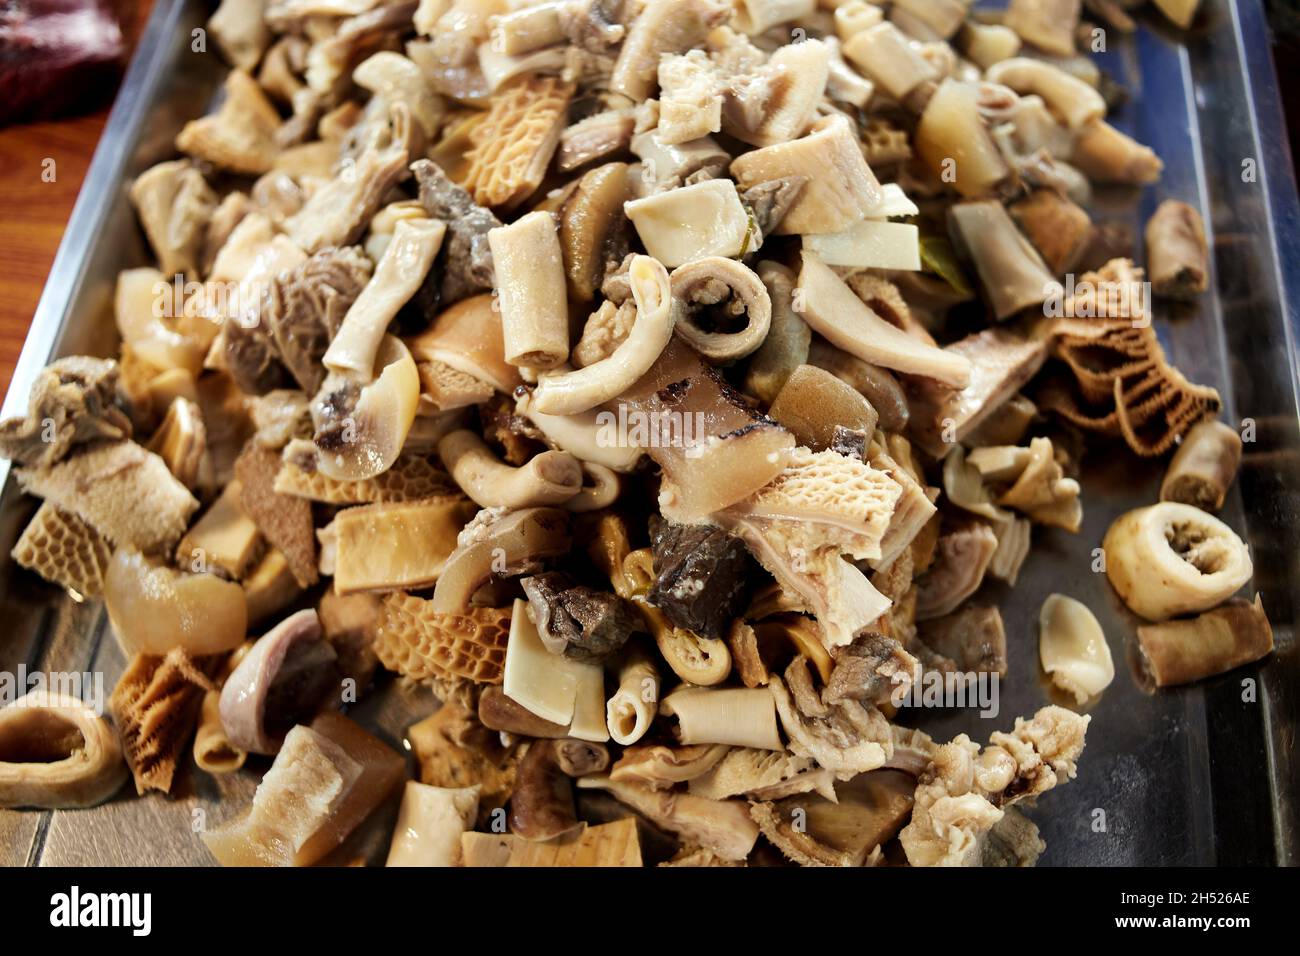 Mixed beef offal boiled on tray for sale Stock Photo